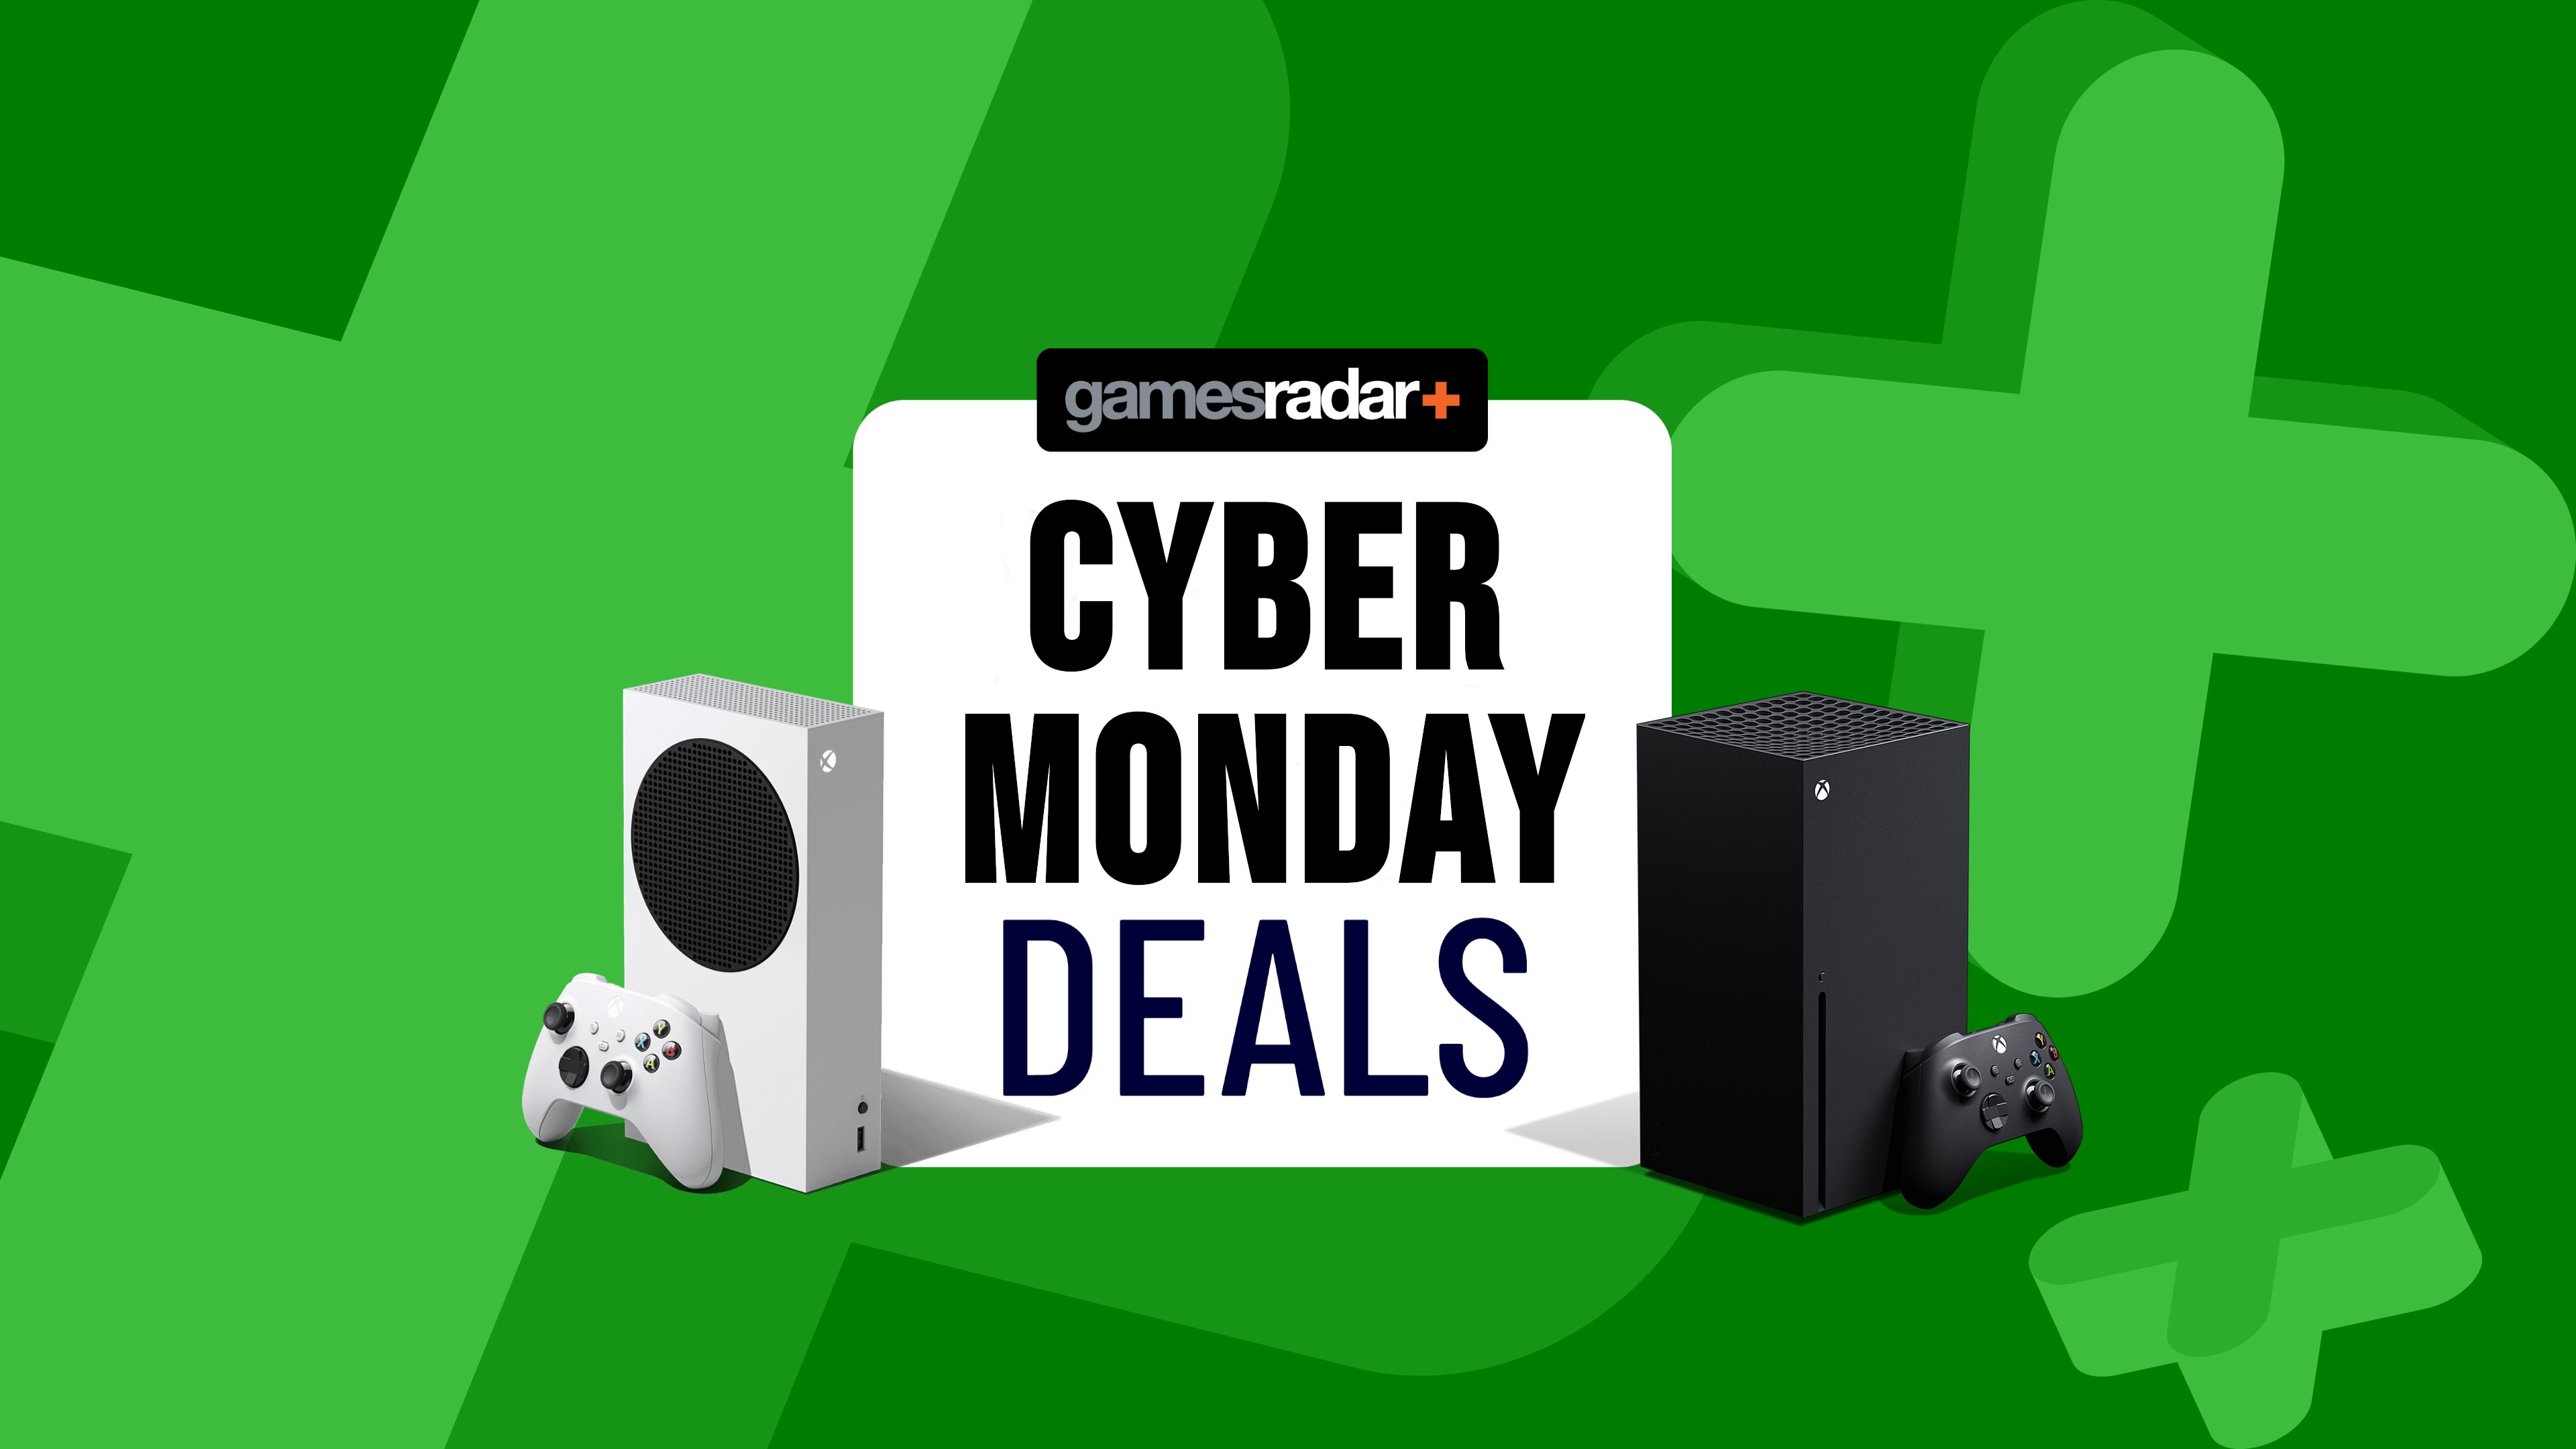 Xbox Post-Cyber Monday: Your Last Chance to Save on These Deals - IGN